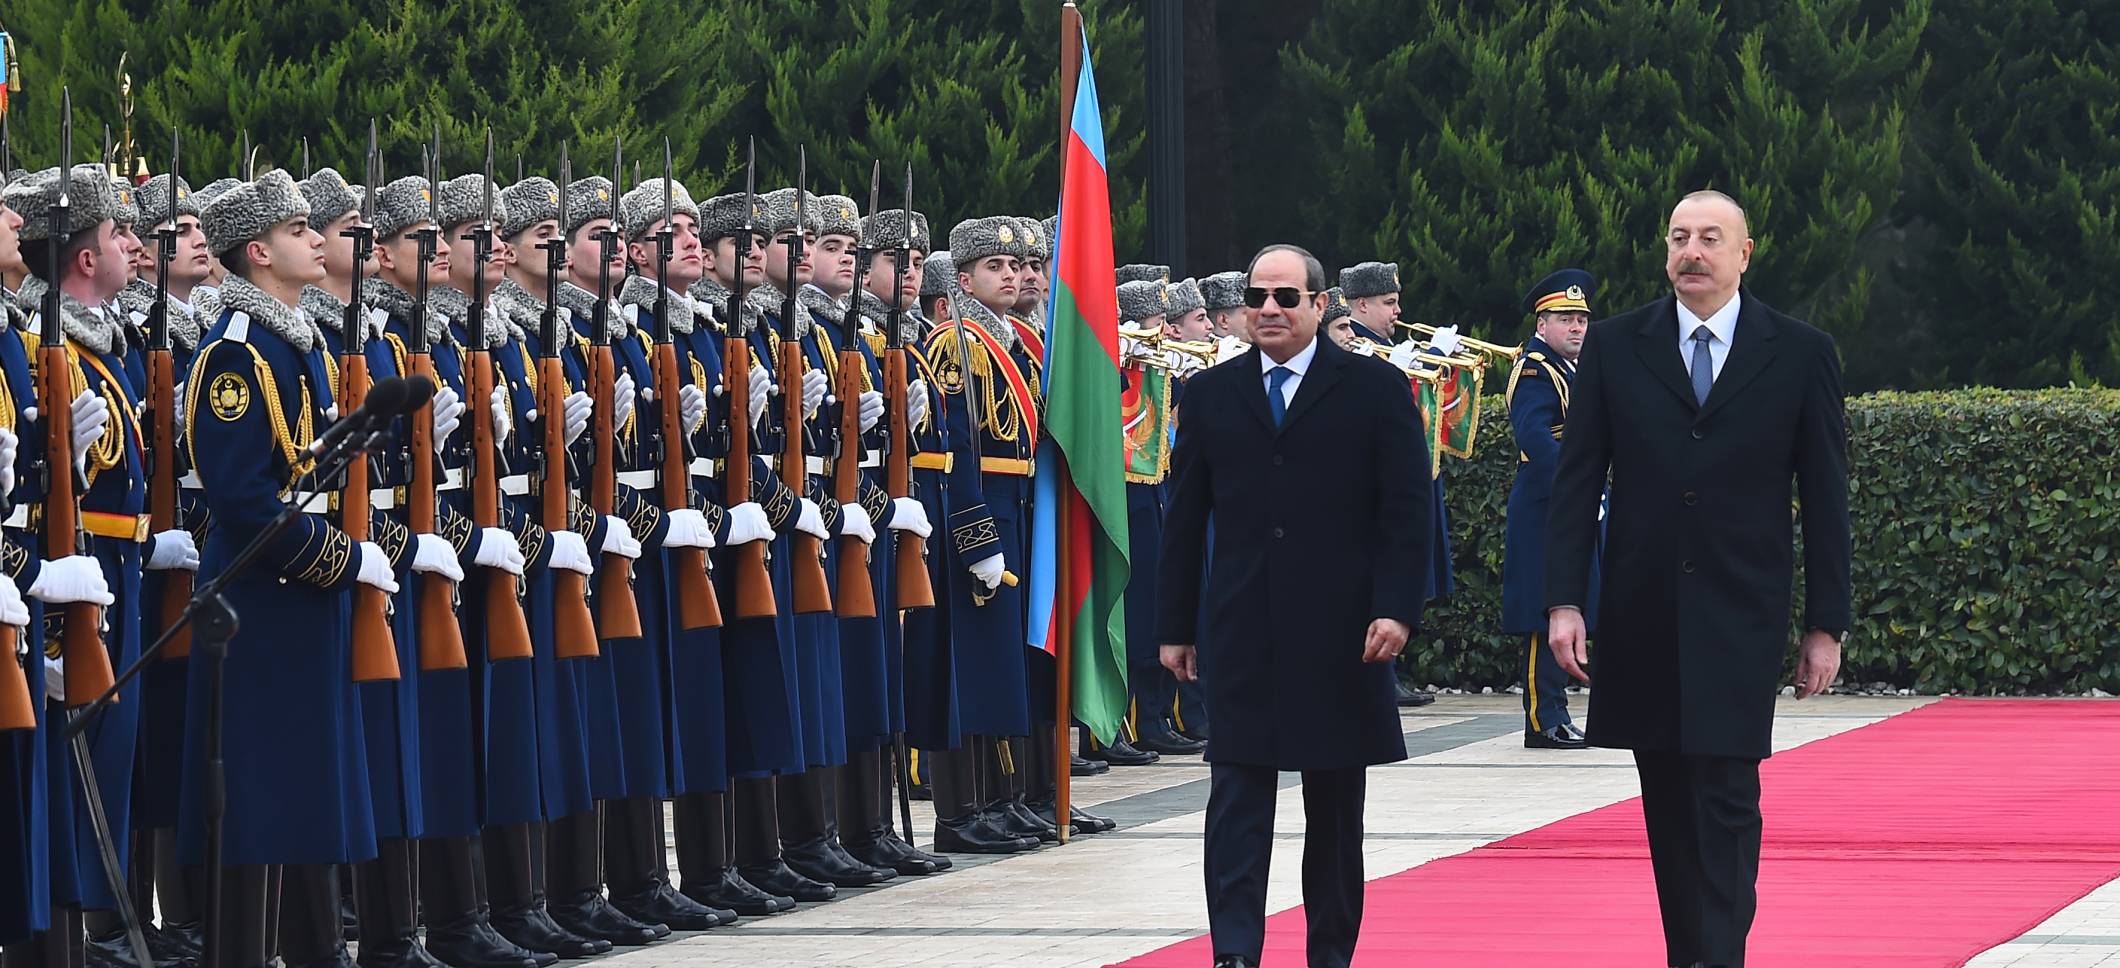 Official welcome ceremony was held for President of Egypt Abdel Fattah El-Sisi